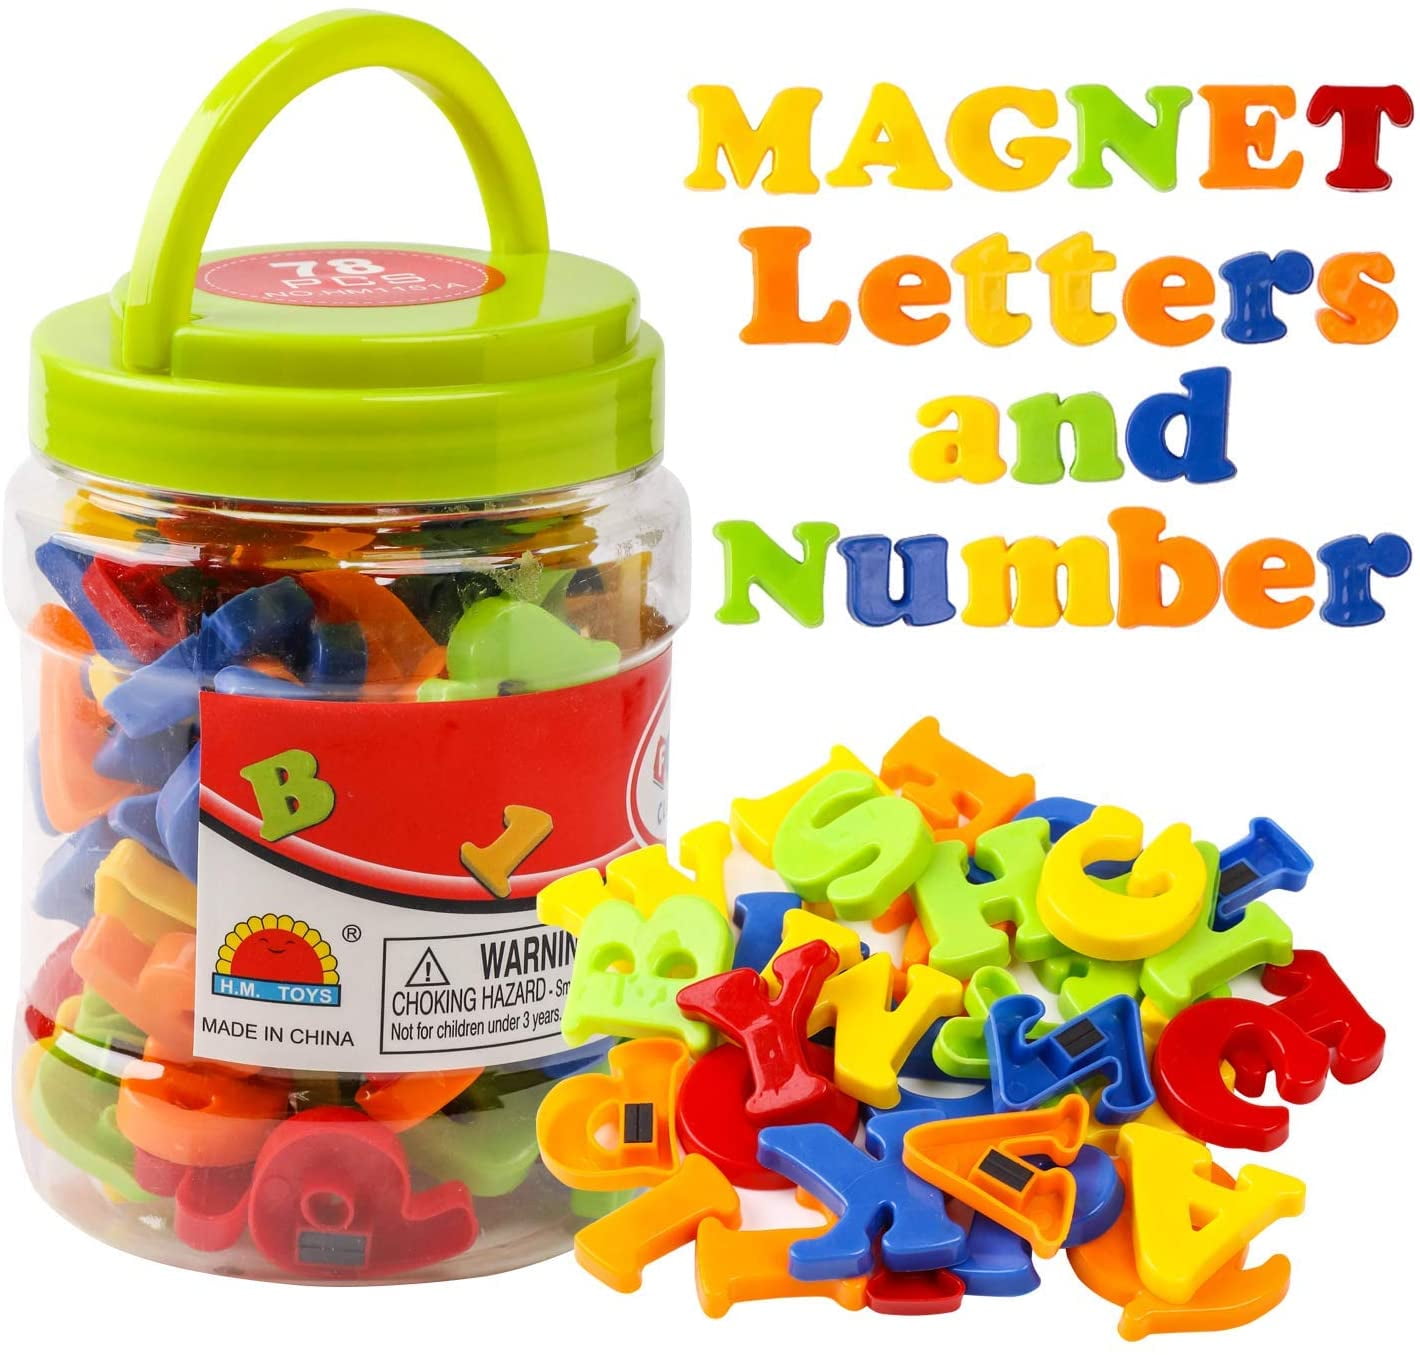 Fridge Magnets Alphabets & Numbers STRONG MAGNETS MAGNETIC BABY LETTERS LARGE 